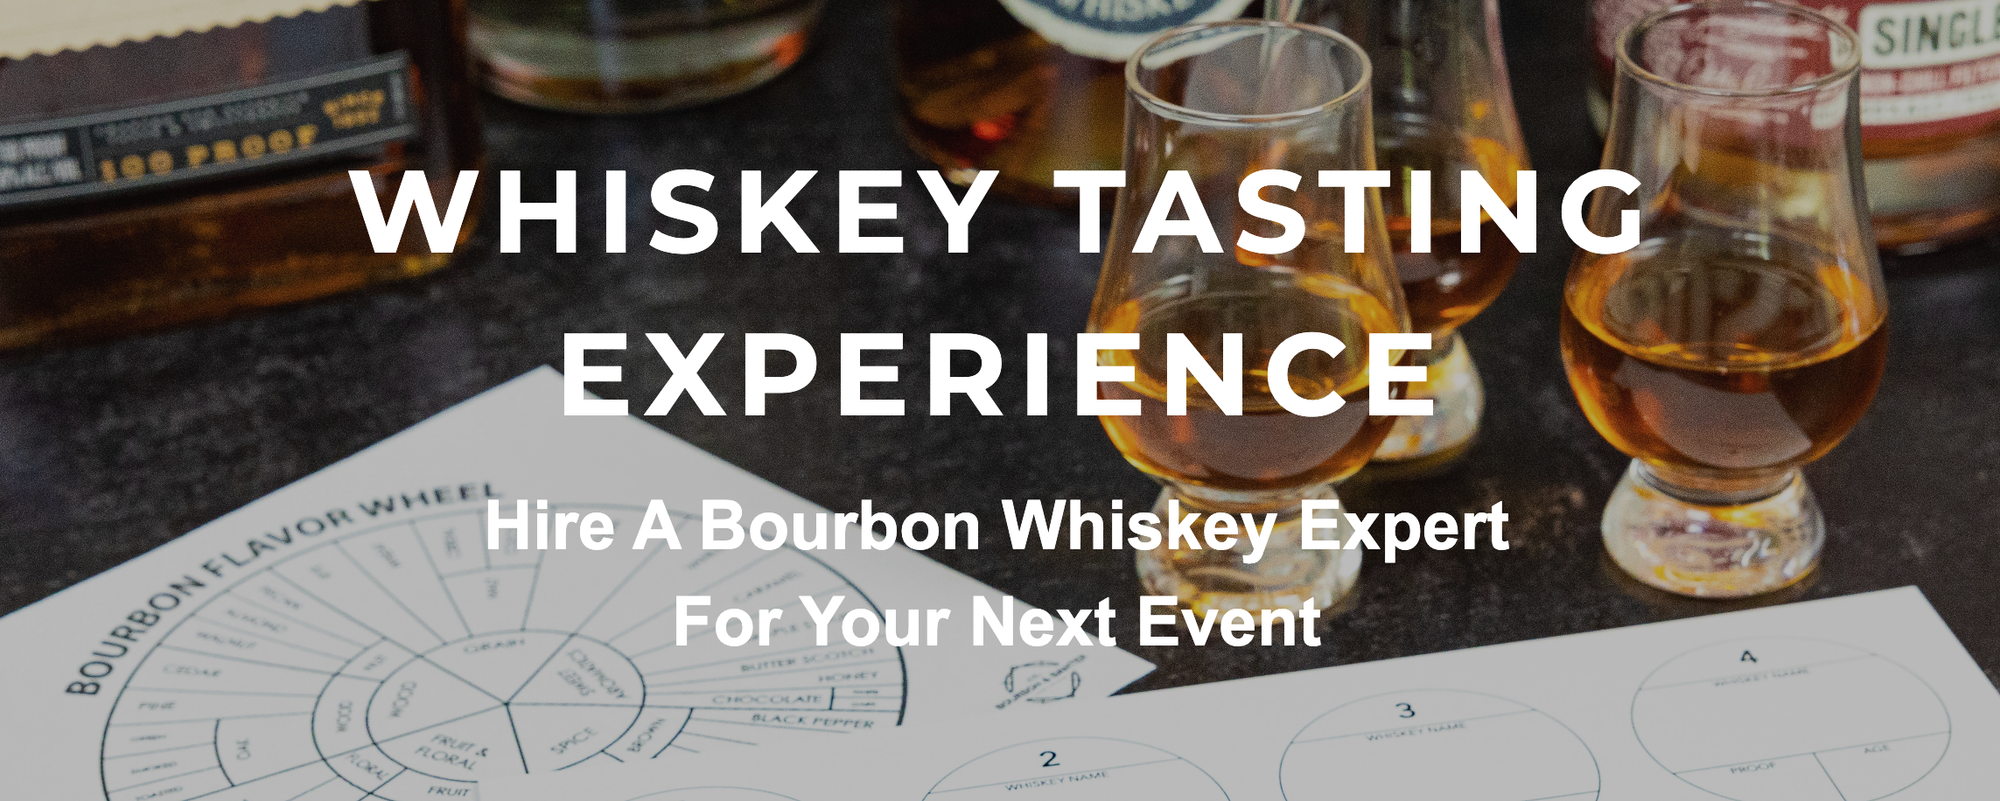 Whiskey Tasting Experience